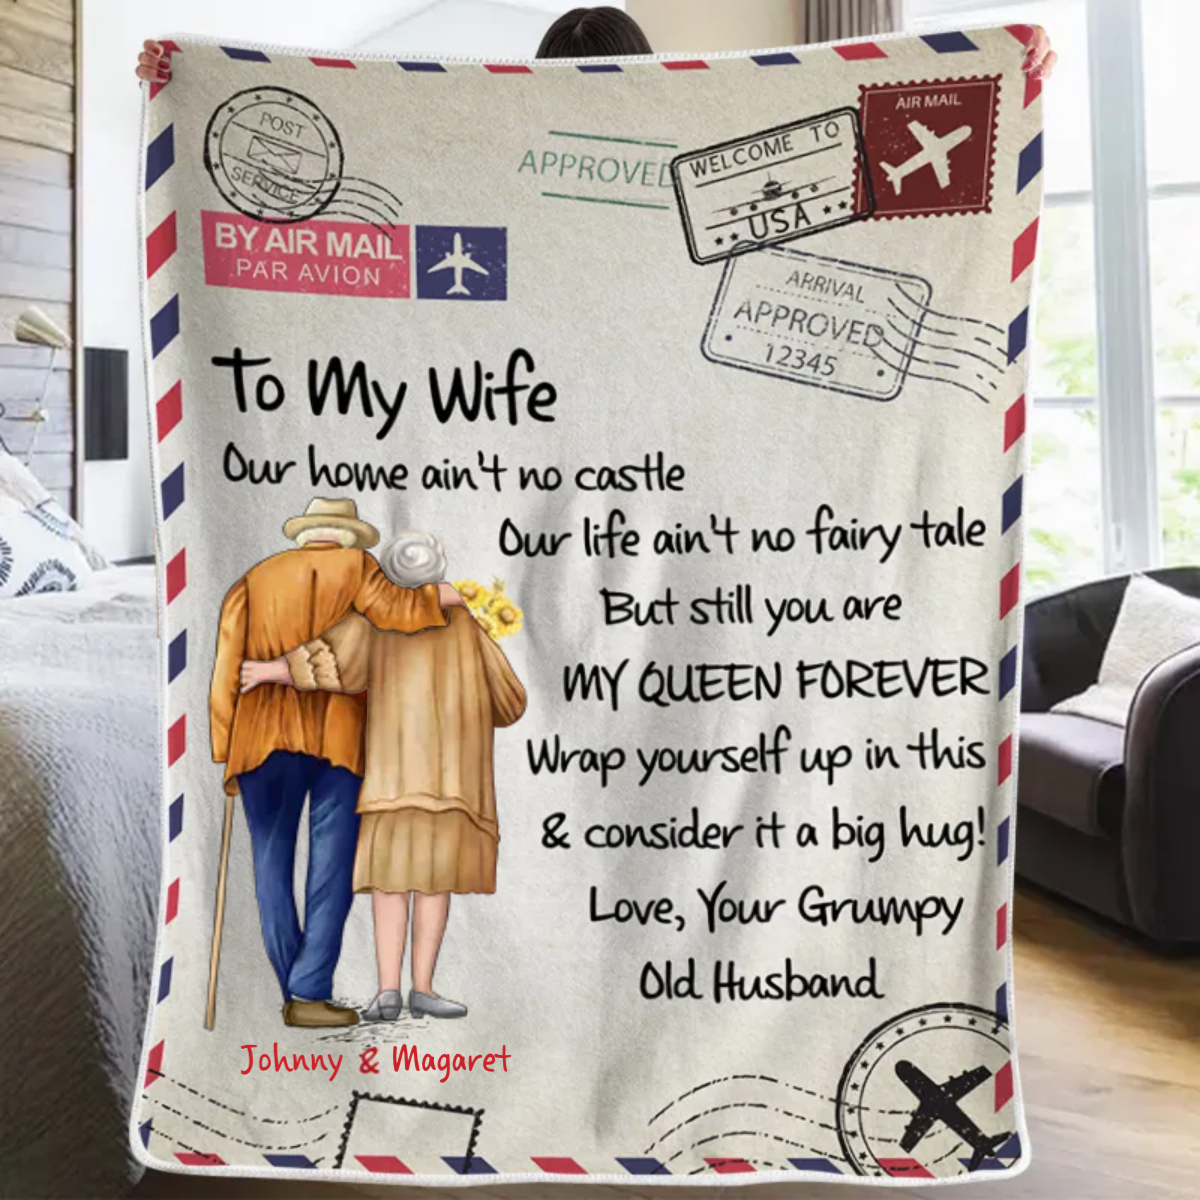 Still You Are My Queen Forever - Anniversary Gift For Wife, Gift For Grandma & Grandpa - Personalized Blanket